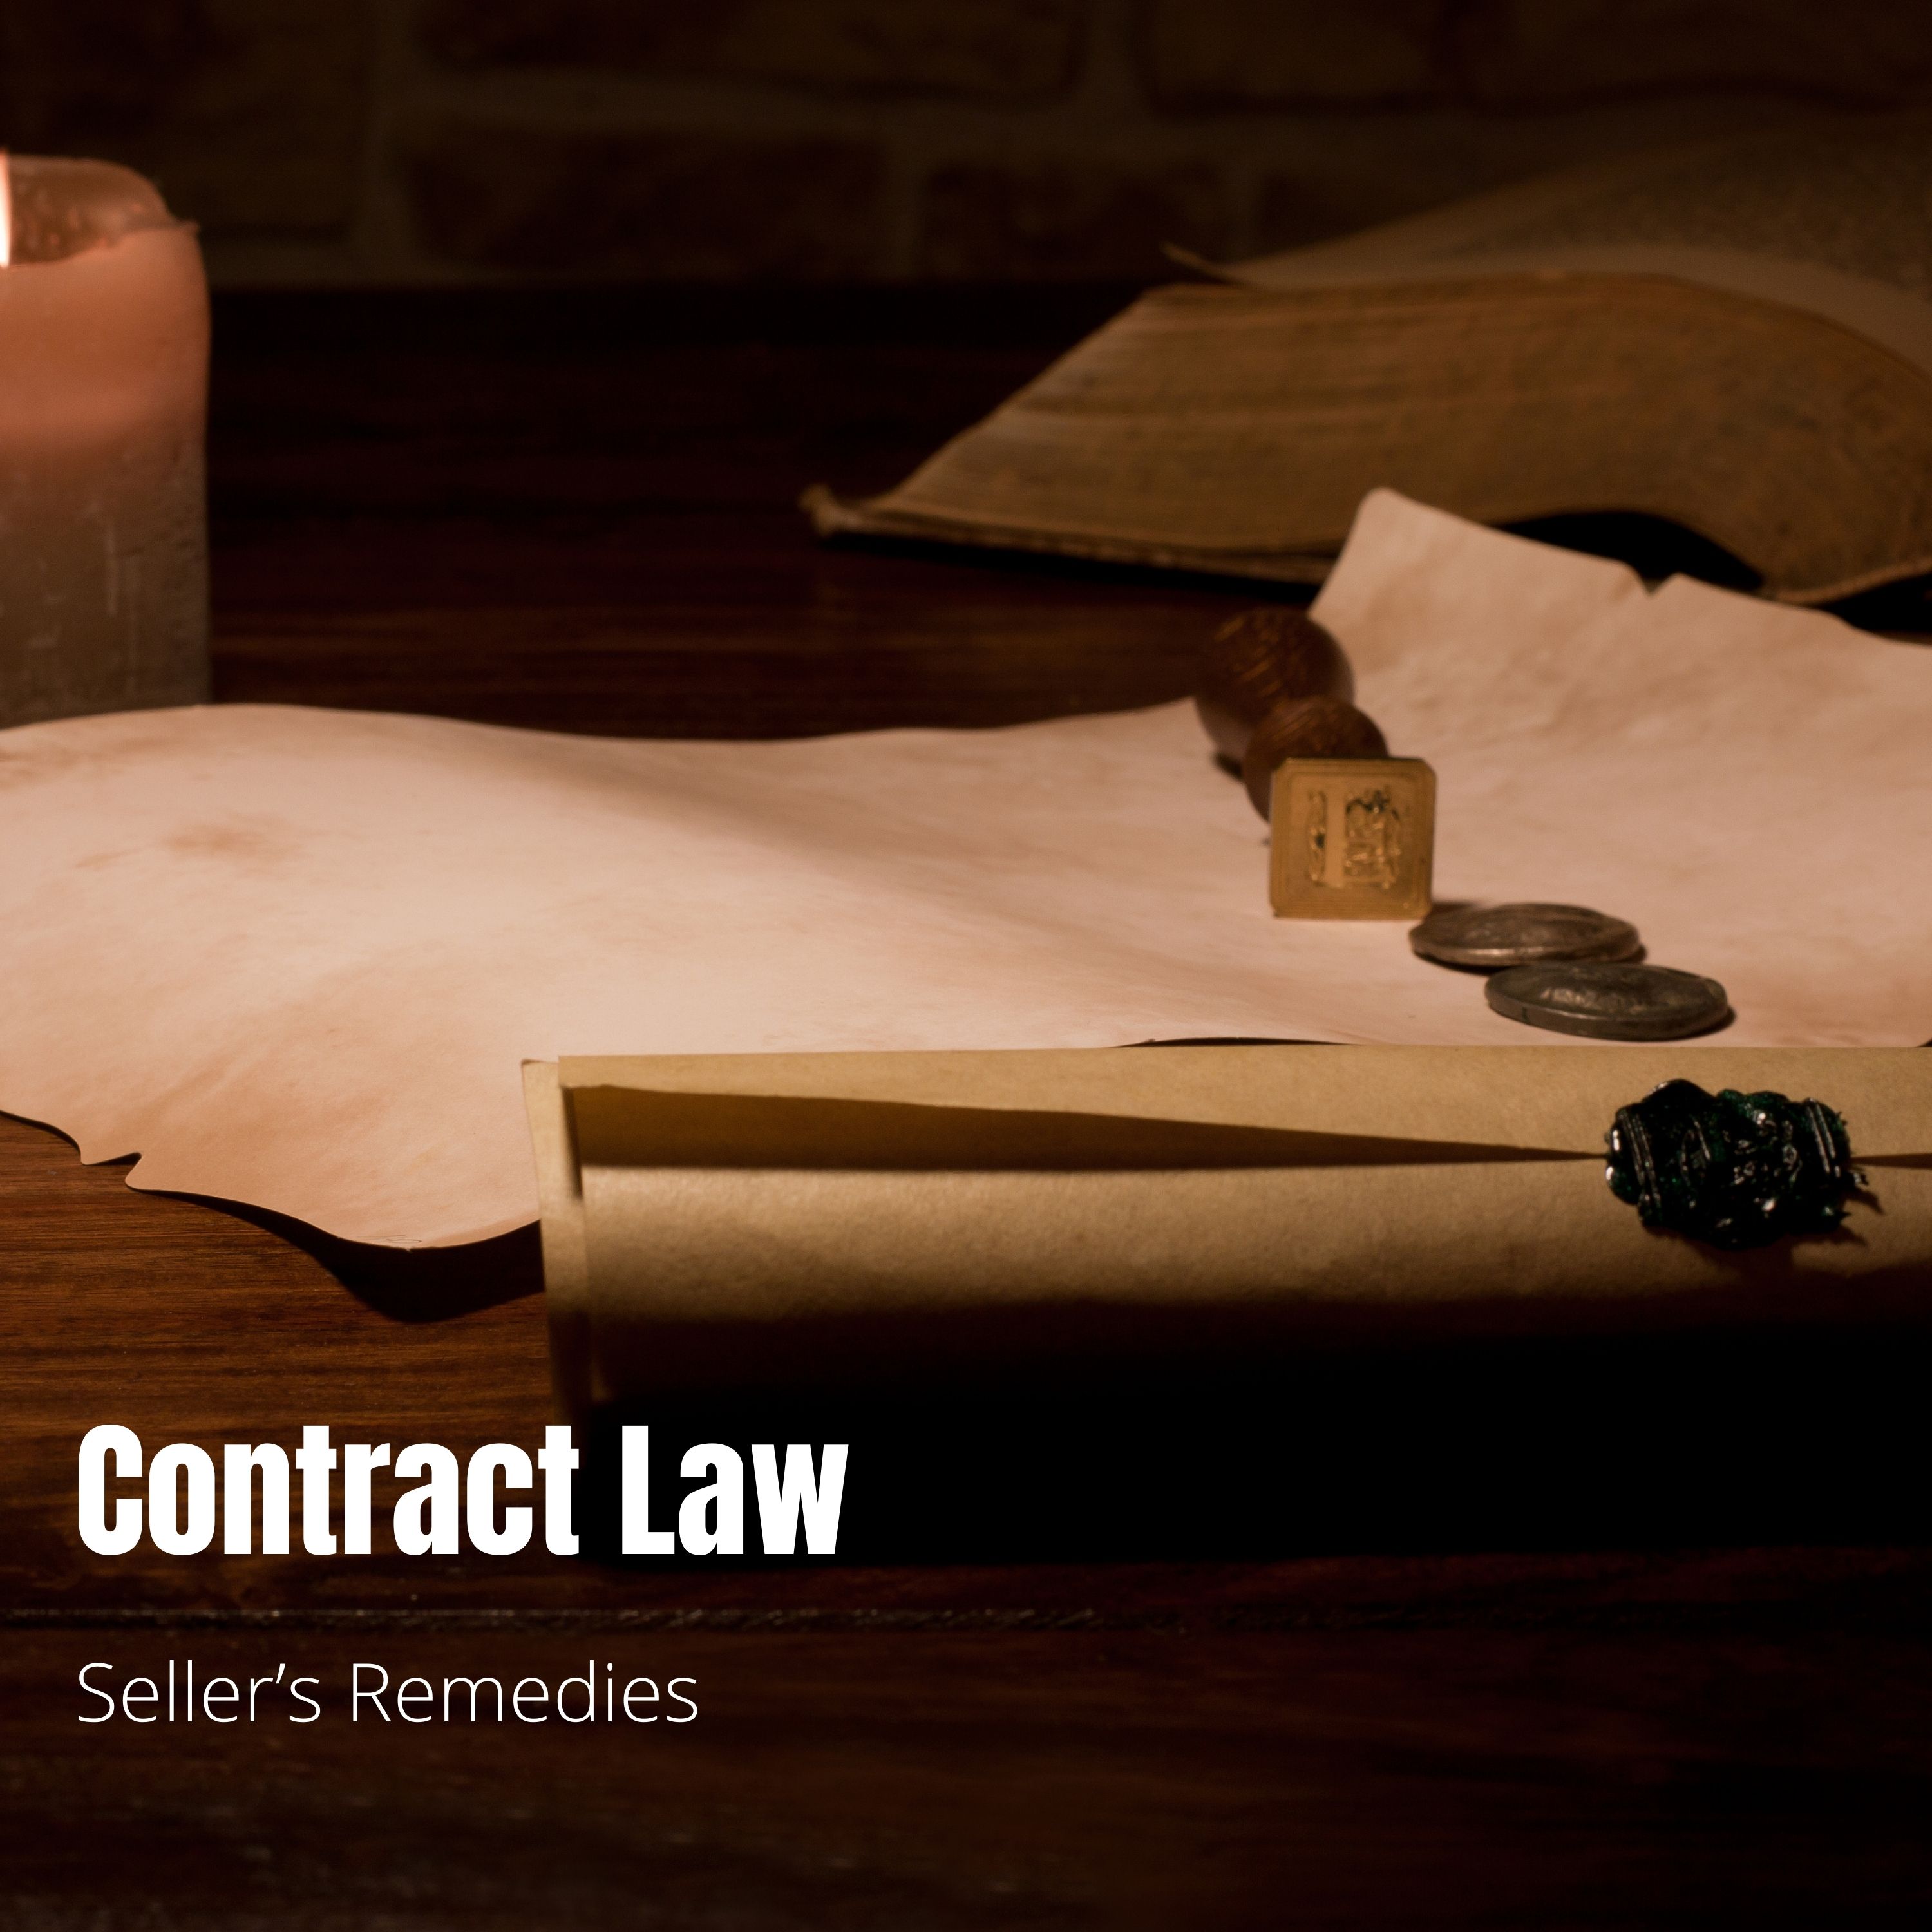 Contract Law - Lecture 13: Common Law Remedy Principles and Seller’s Remedies under the UCC